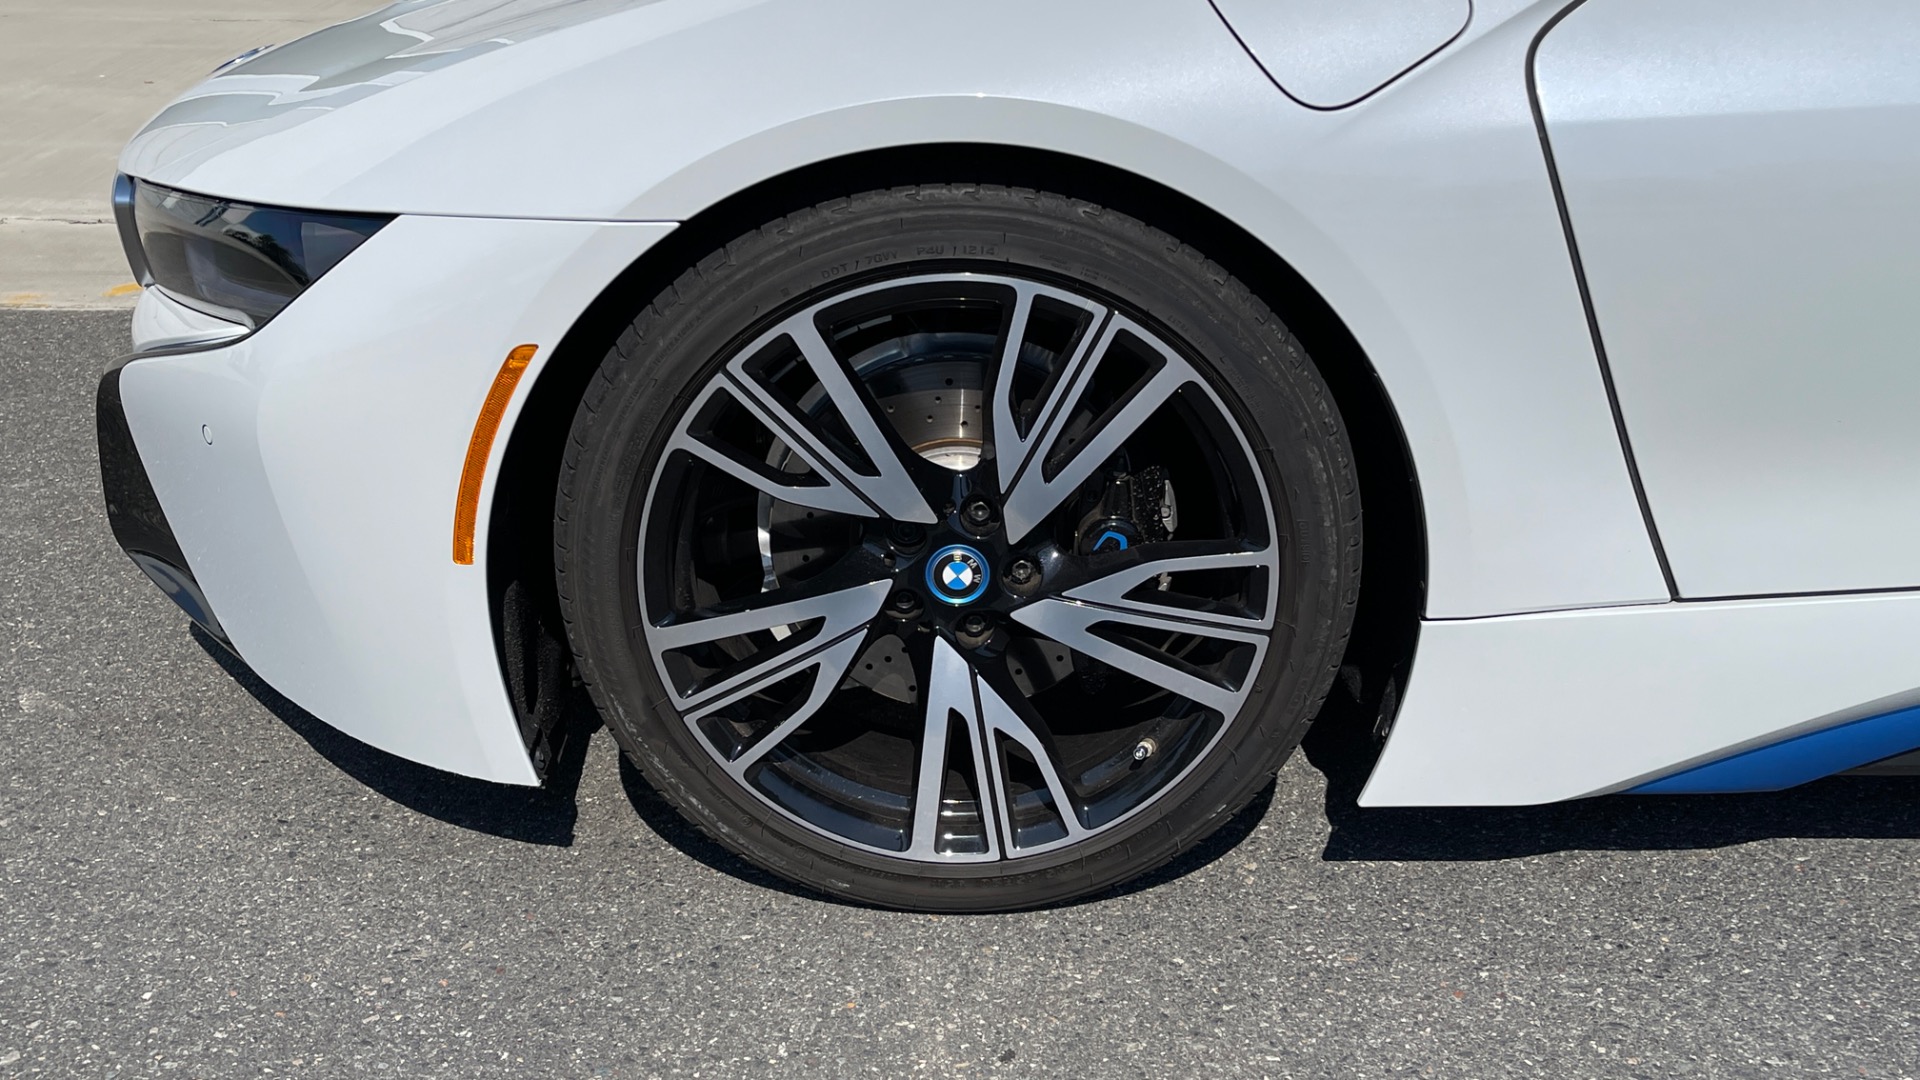 Used 2014 BMW i8 PURE IMPULSE WORLD / BLUE SEATBELTS / PERFORATED LEATHER / LED HEADLIGHTS for sale $75,999 at Formula Imports in Charlotte NC 28227 32